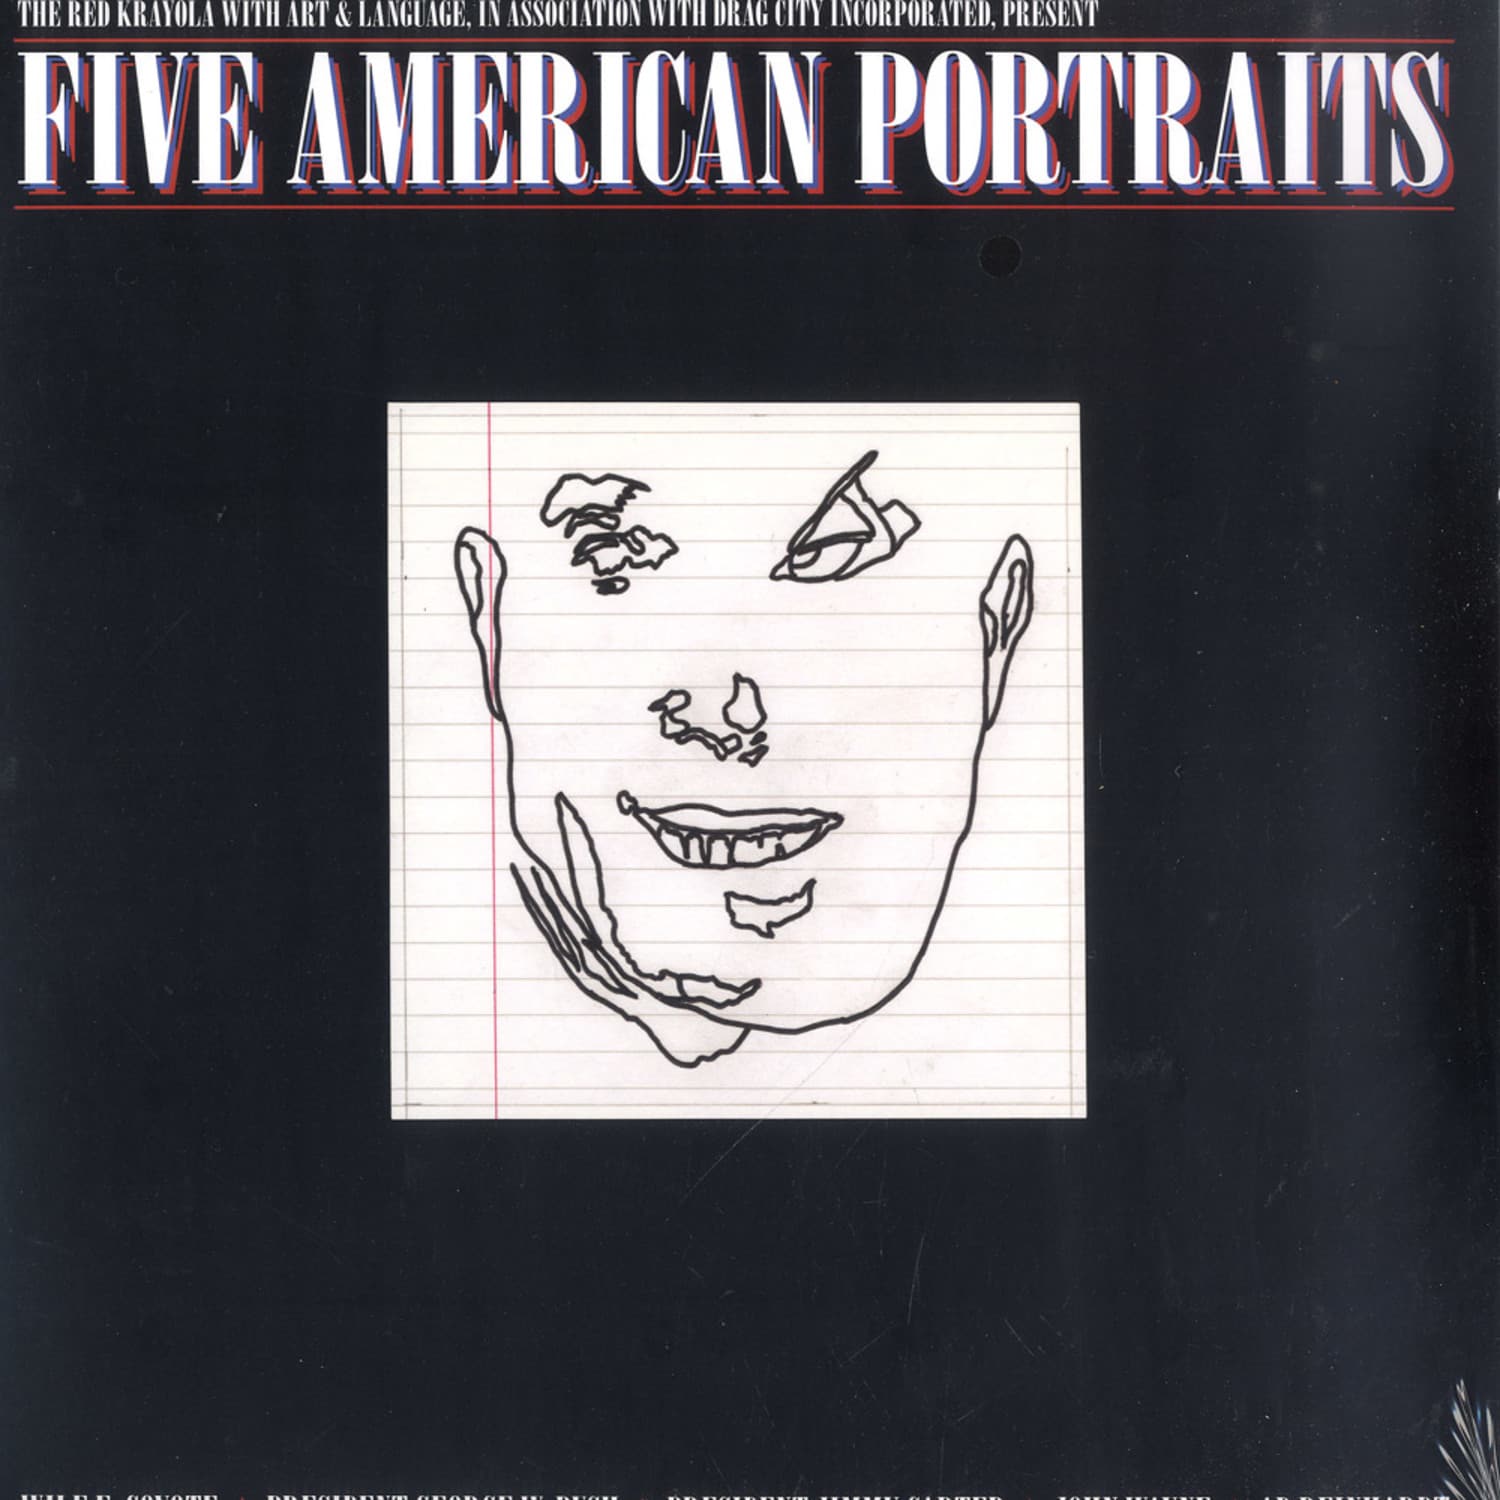 The Red Krayola With Art And Language - FIVE AMERICAN PORTRAITS